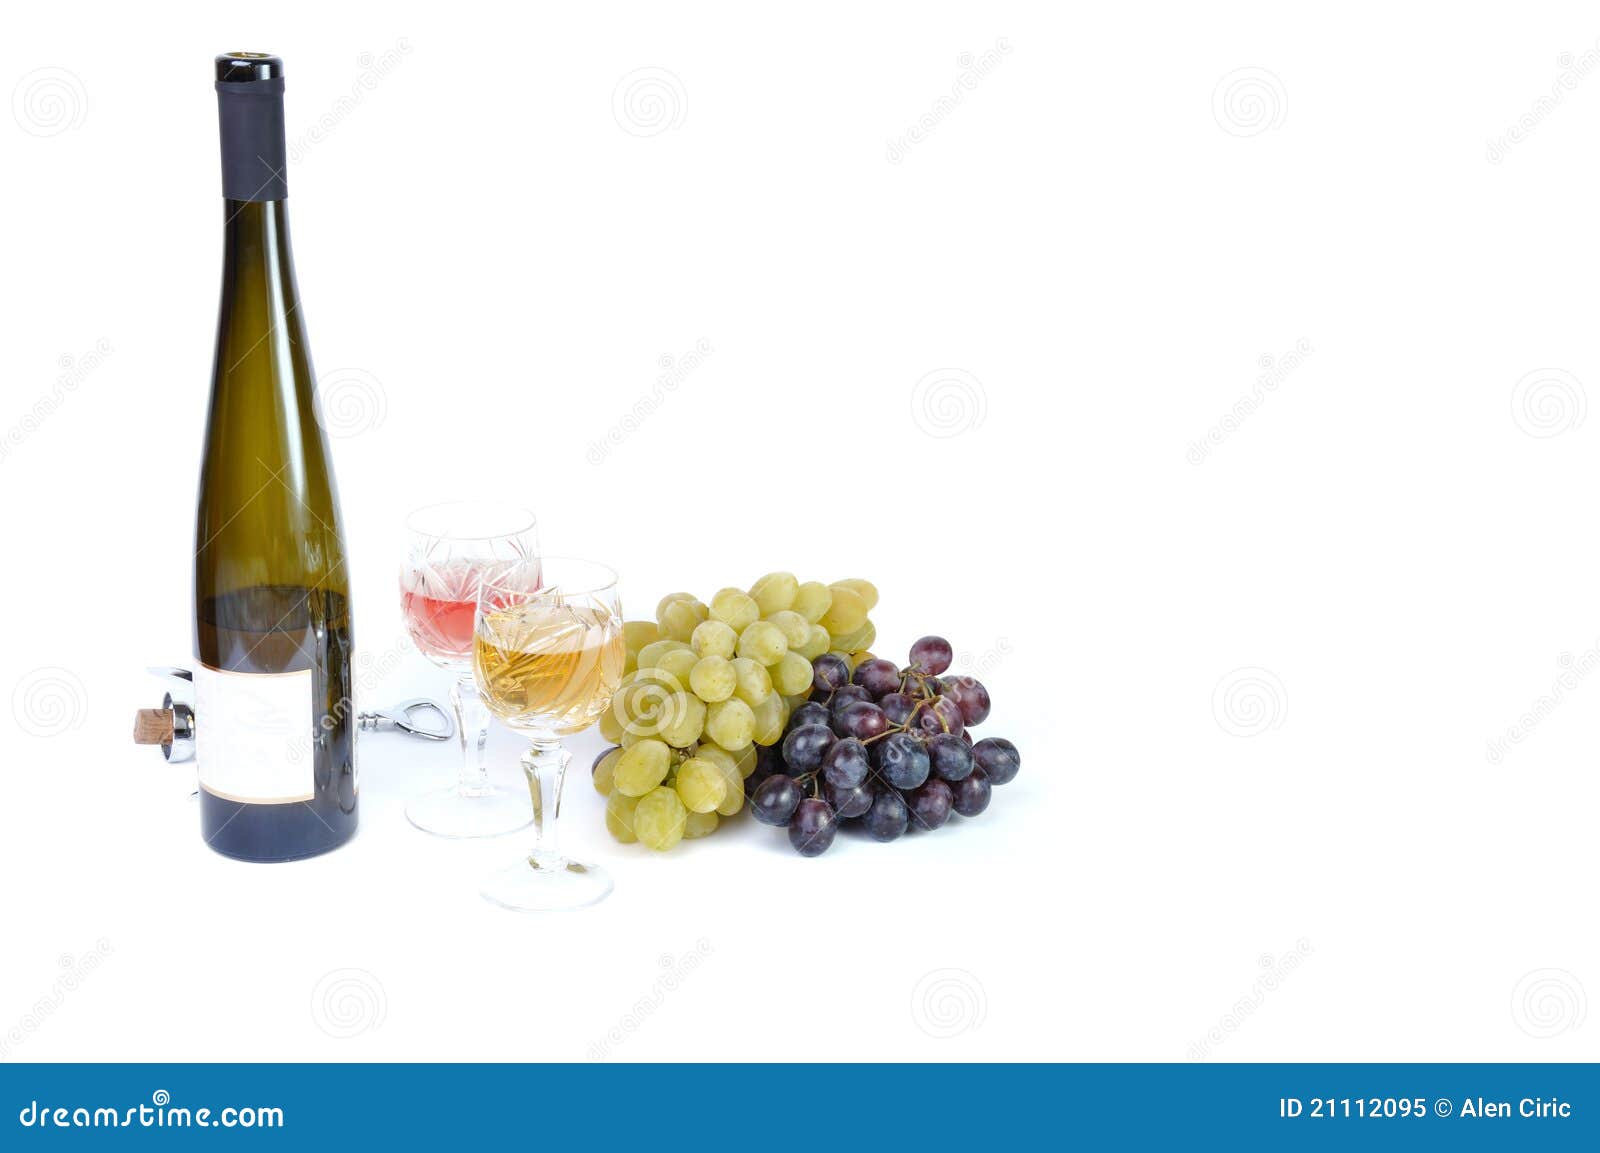 bottle of wine with aperitive, glasses of wine